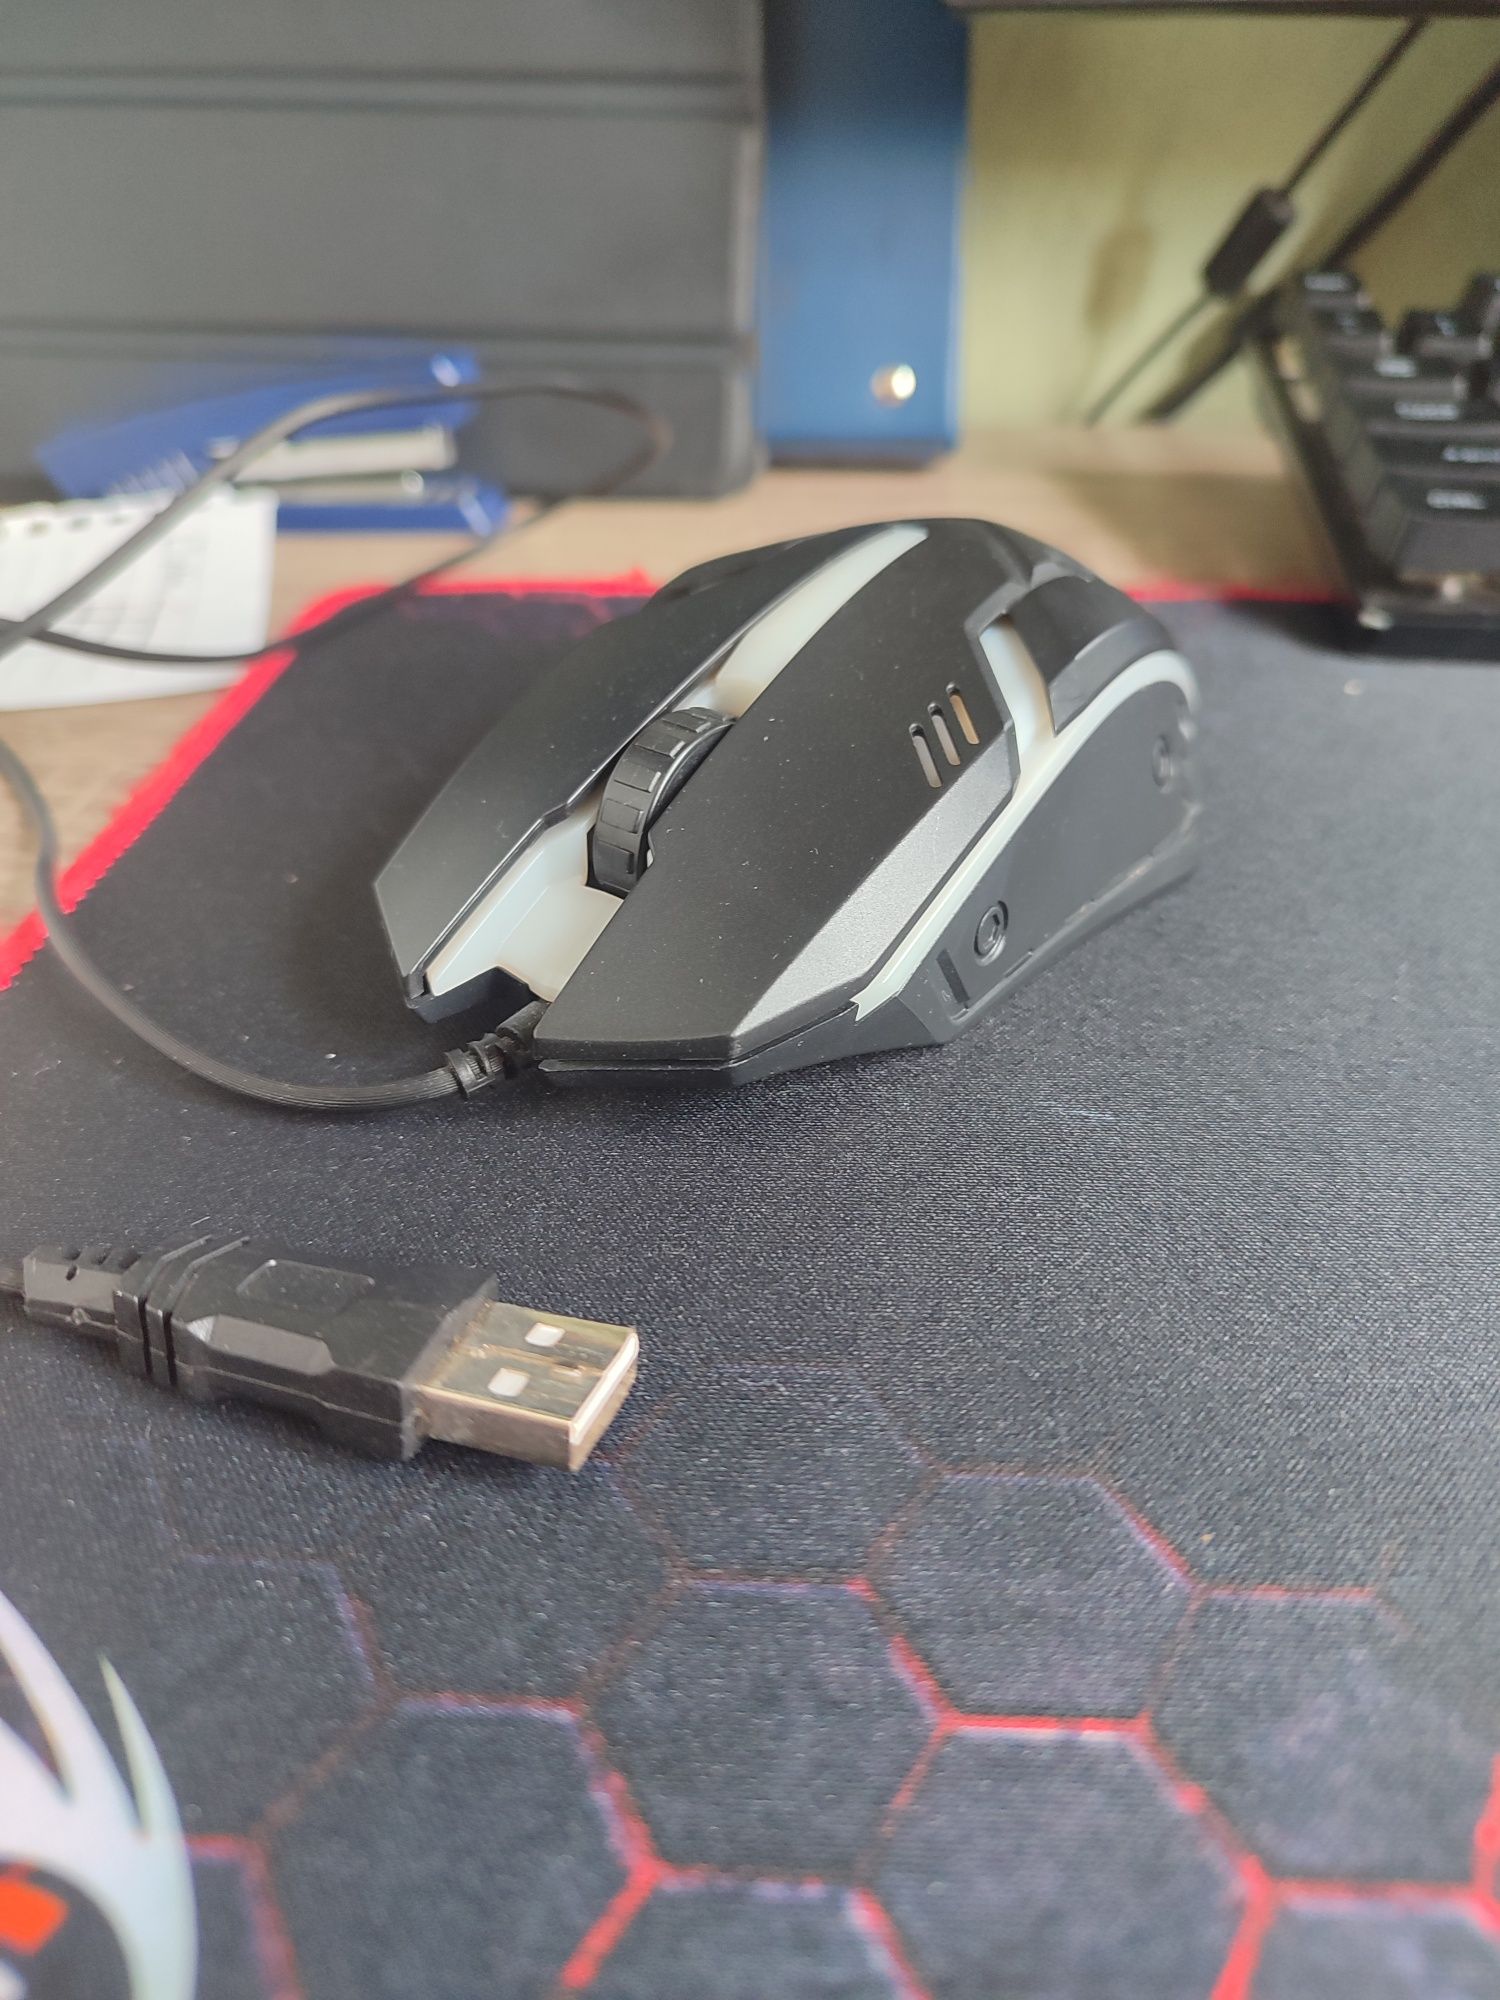 Vând mouse Spacer de gaming